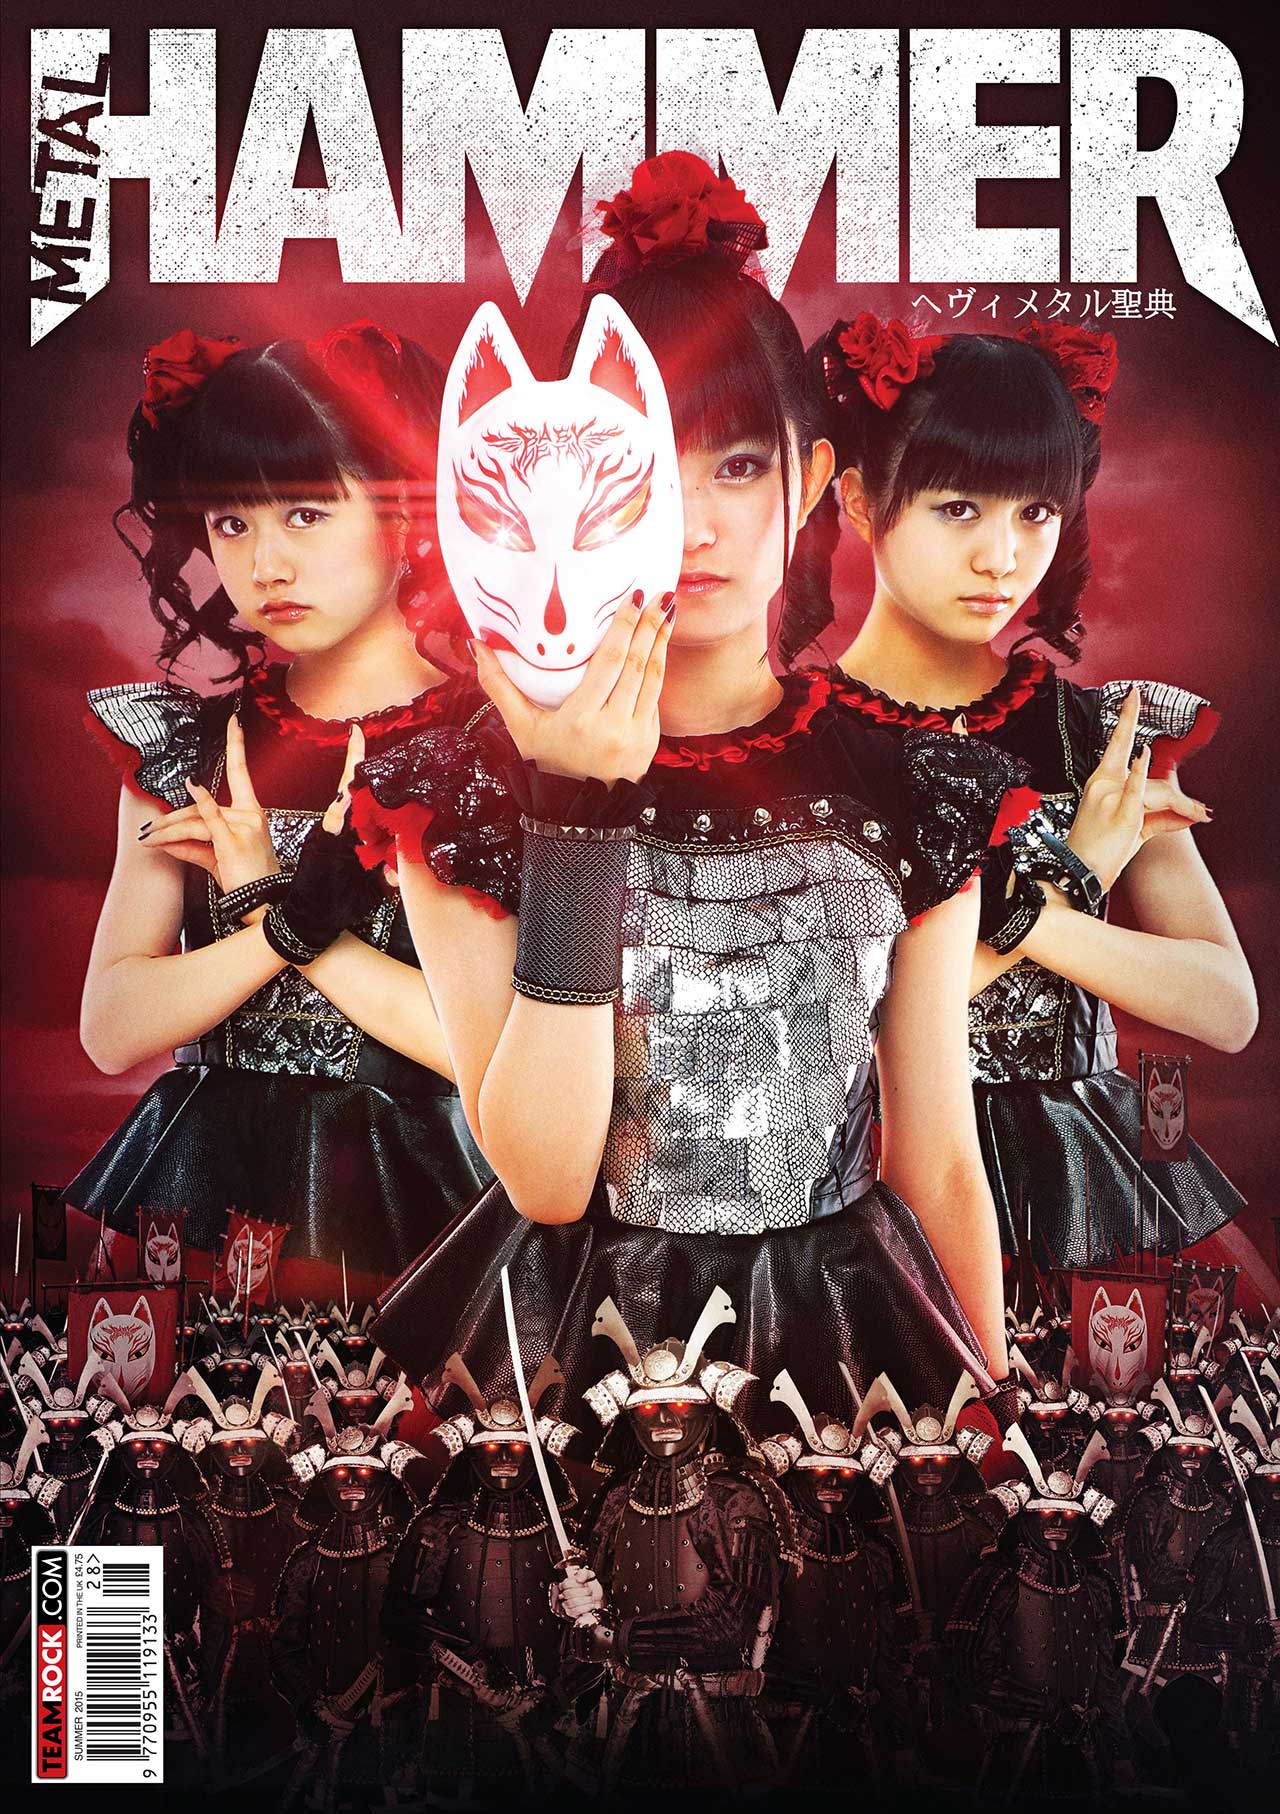 1687 best BABYMETAL archives images on Pinterest | Metal, Metals and ...